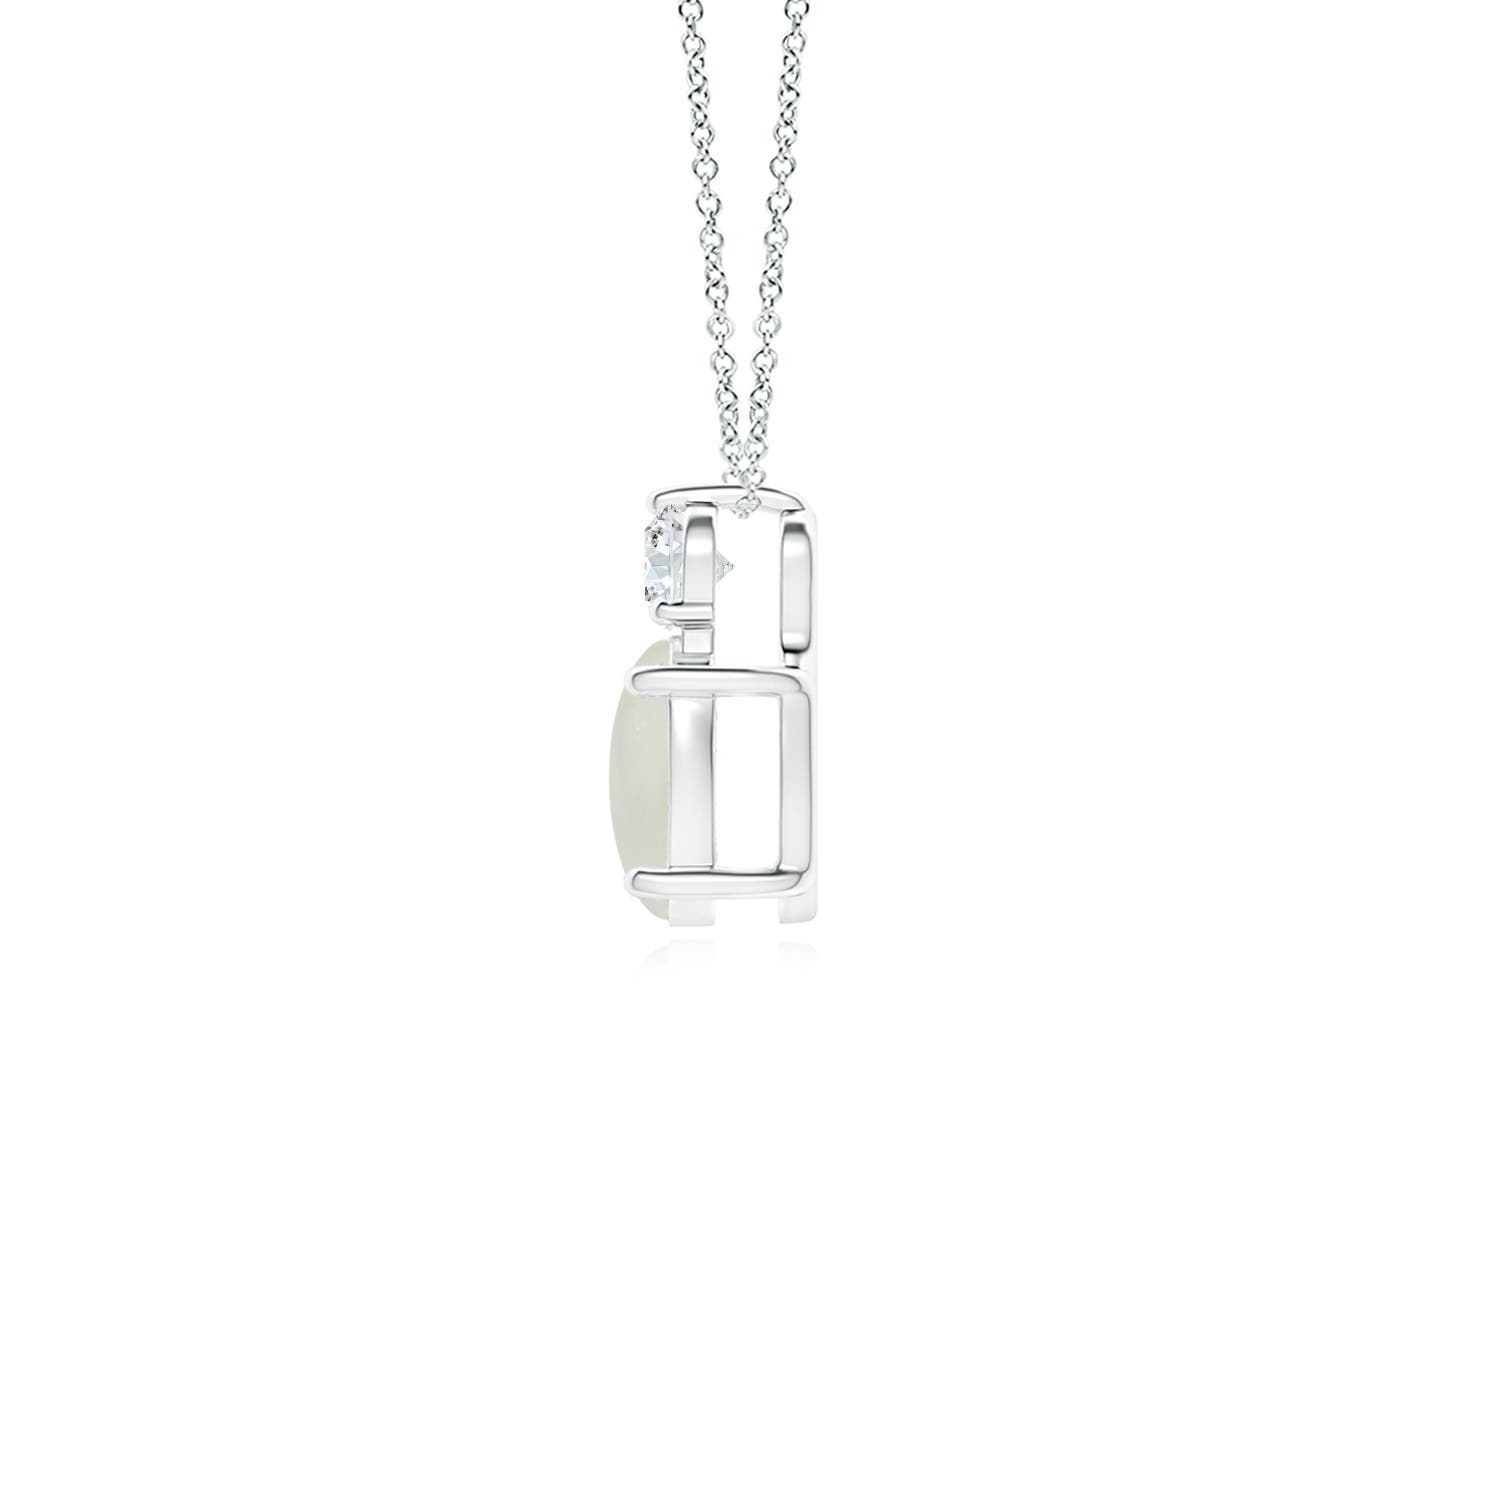 Shop Moonstone Necklaces for Women | Angara